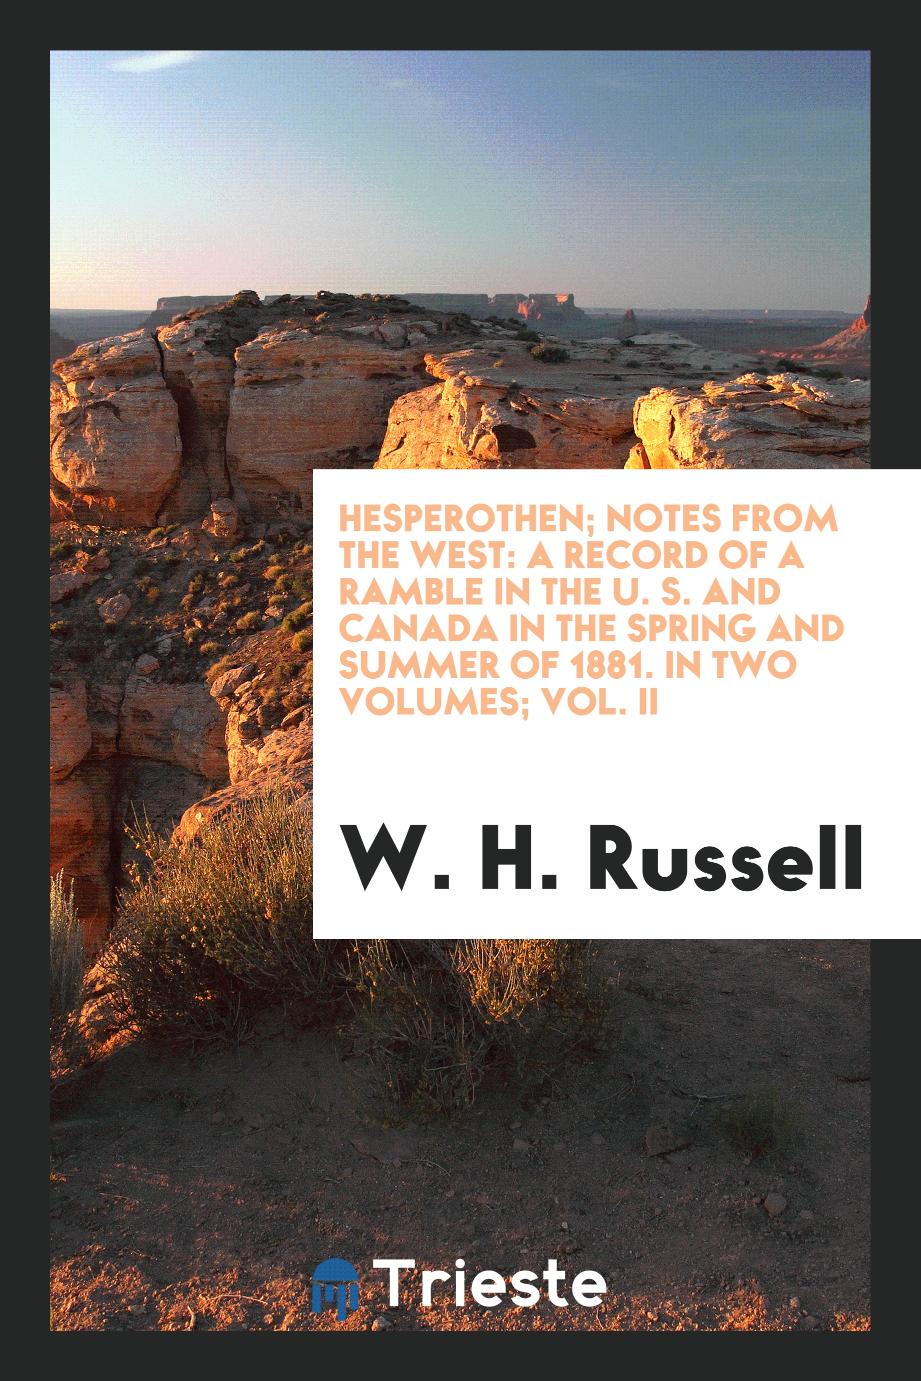 Hesperothen; Notes from the West: A Record of a Ramble in the U. S. and Canada in the Spring and Summer of 1881. In Two Volumes; Vol. II